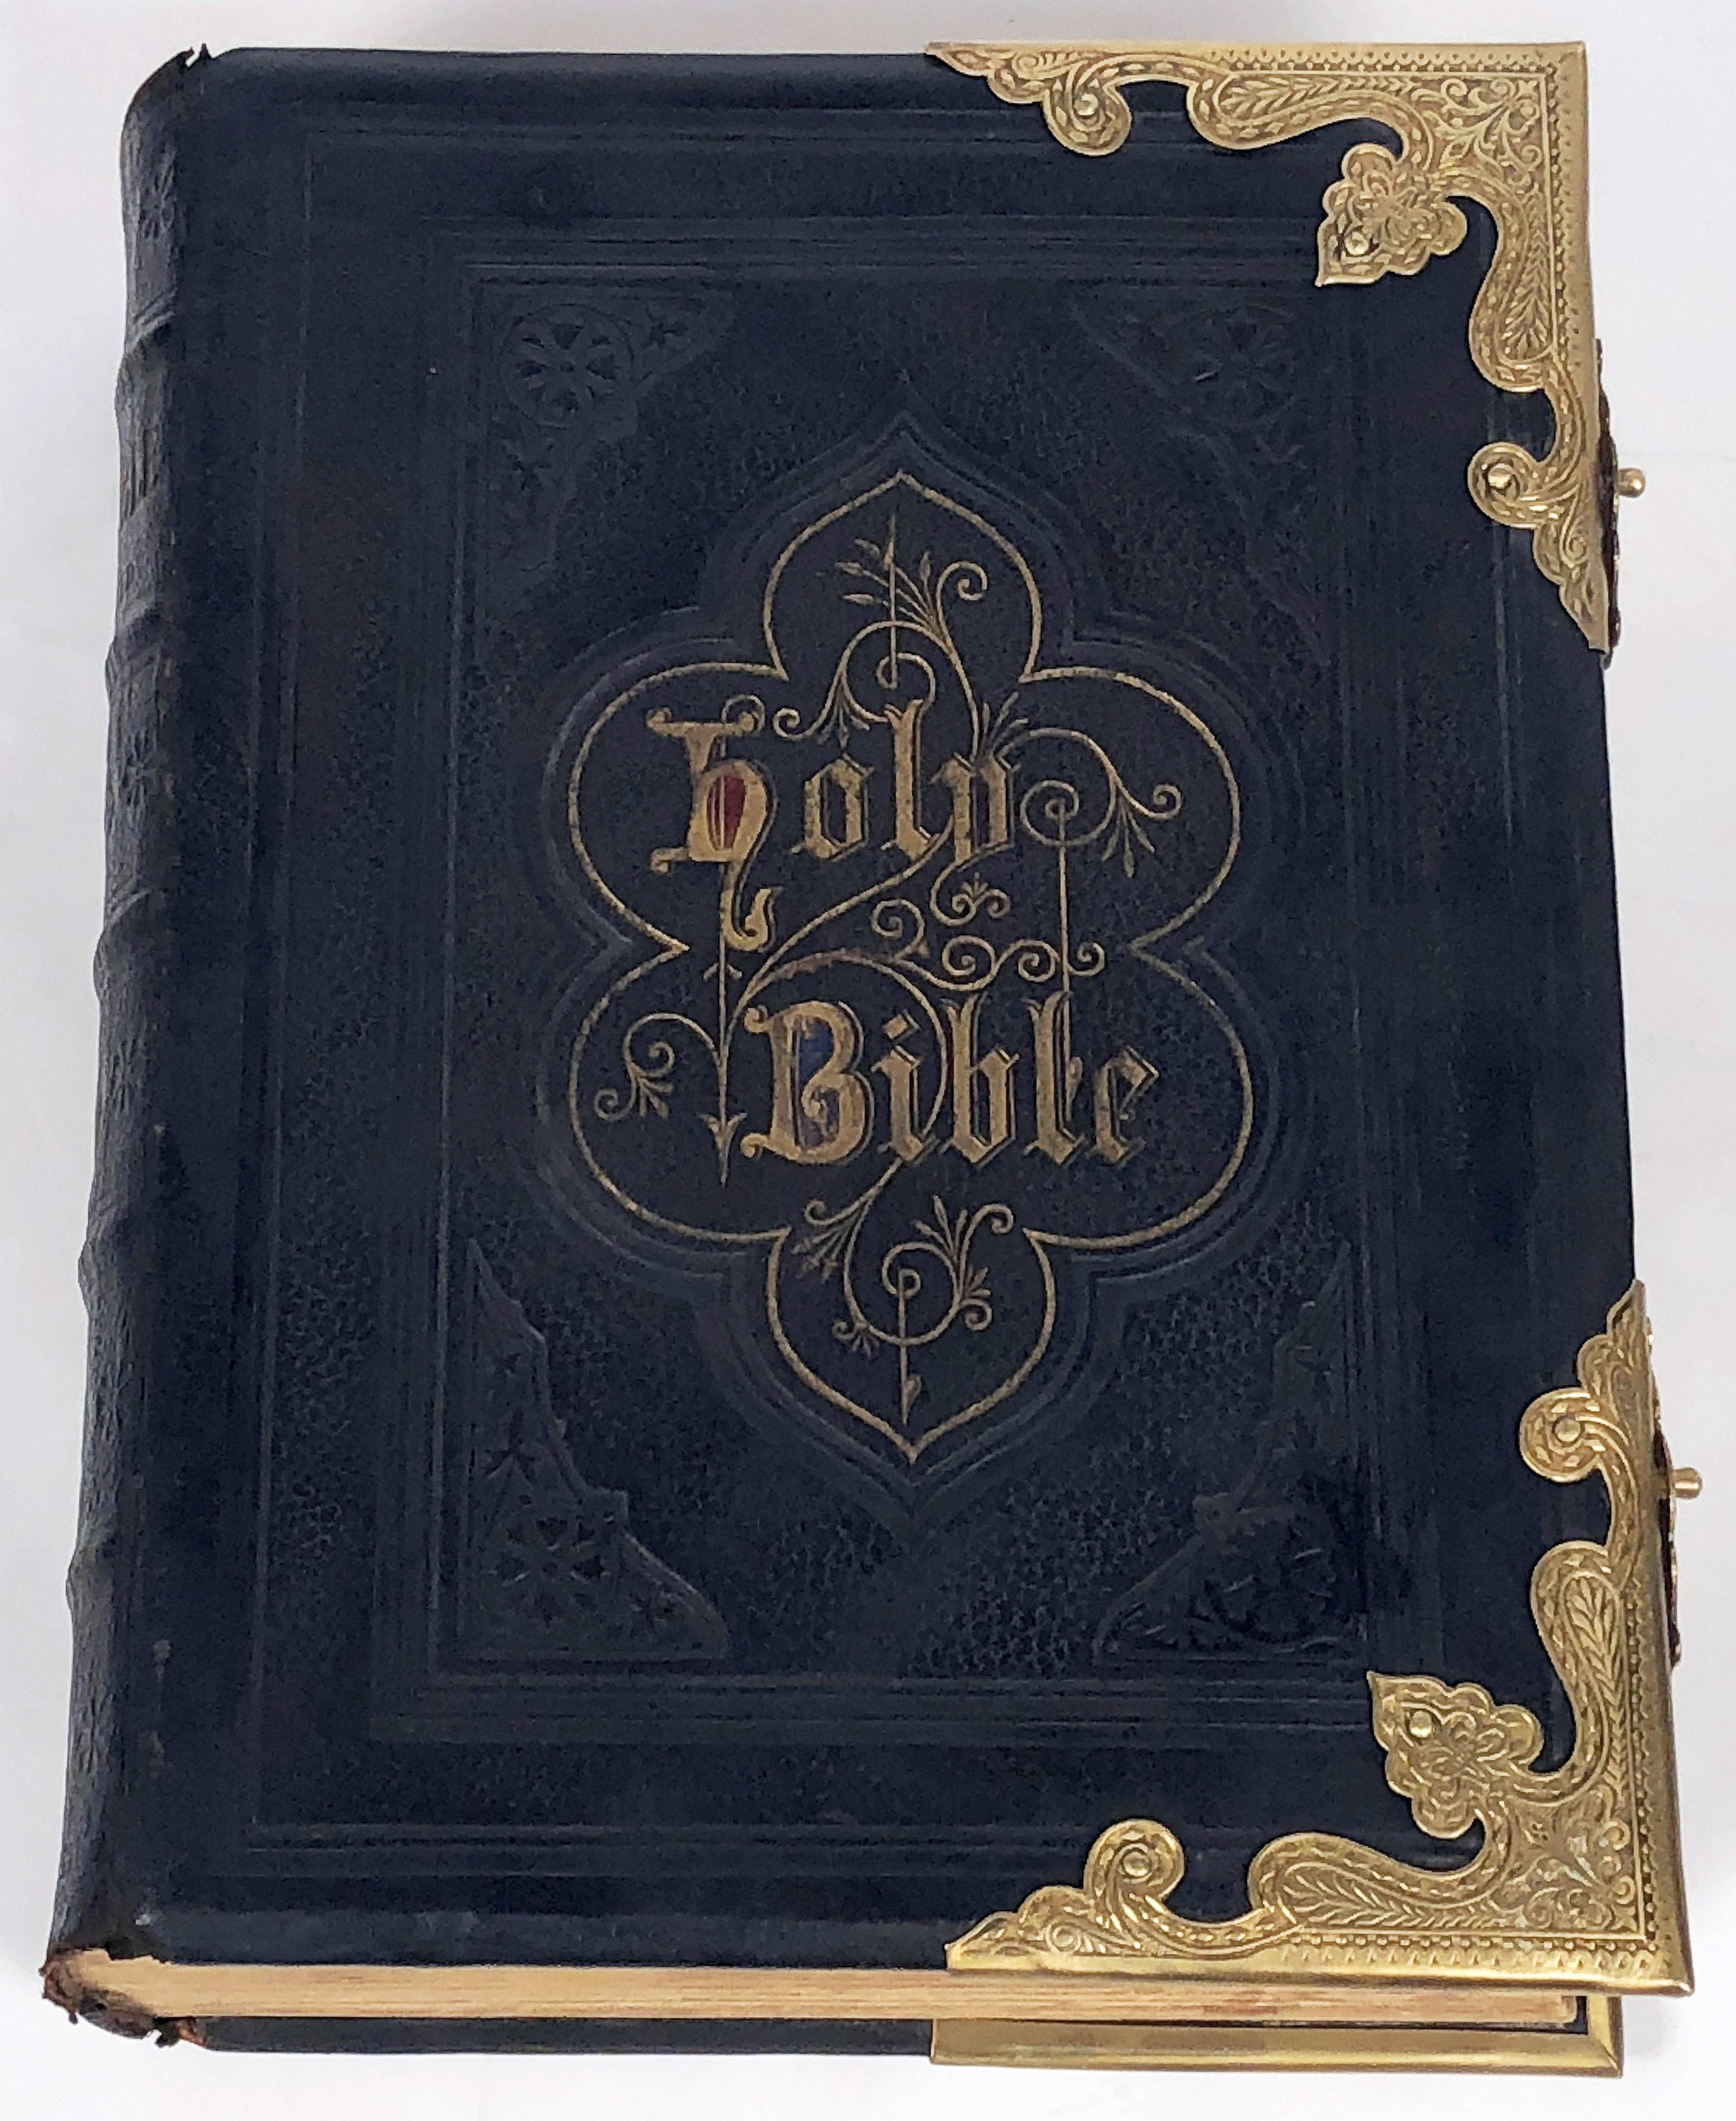 A fine 19th century holy bible published in Scotland by John McGready, Publisher, Glasgow

Block-titled “The Practical and Devotional Family Bible - The Holy Bible with the Commentaries of Henry and Scott